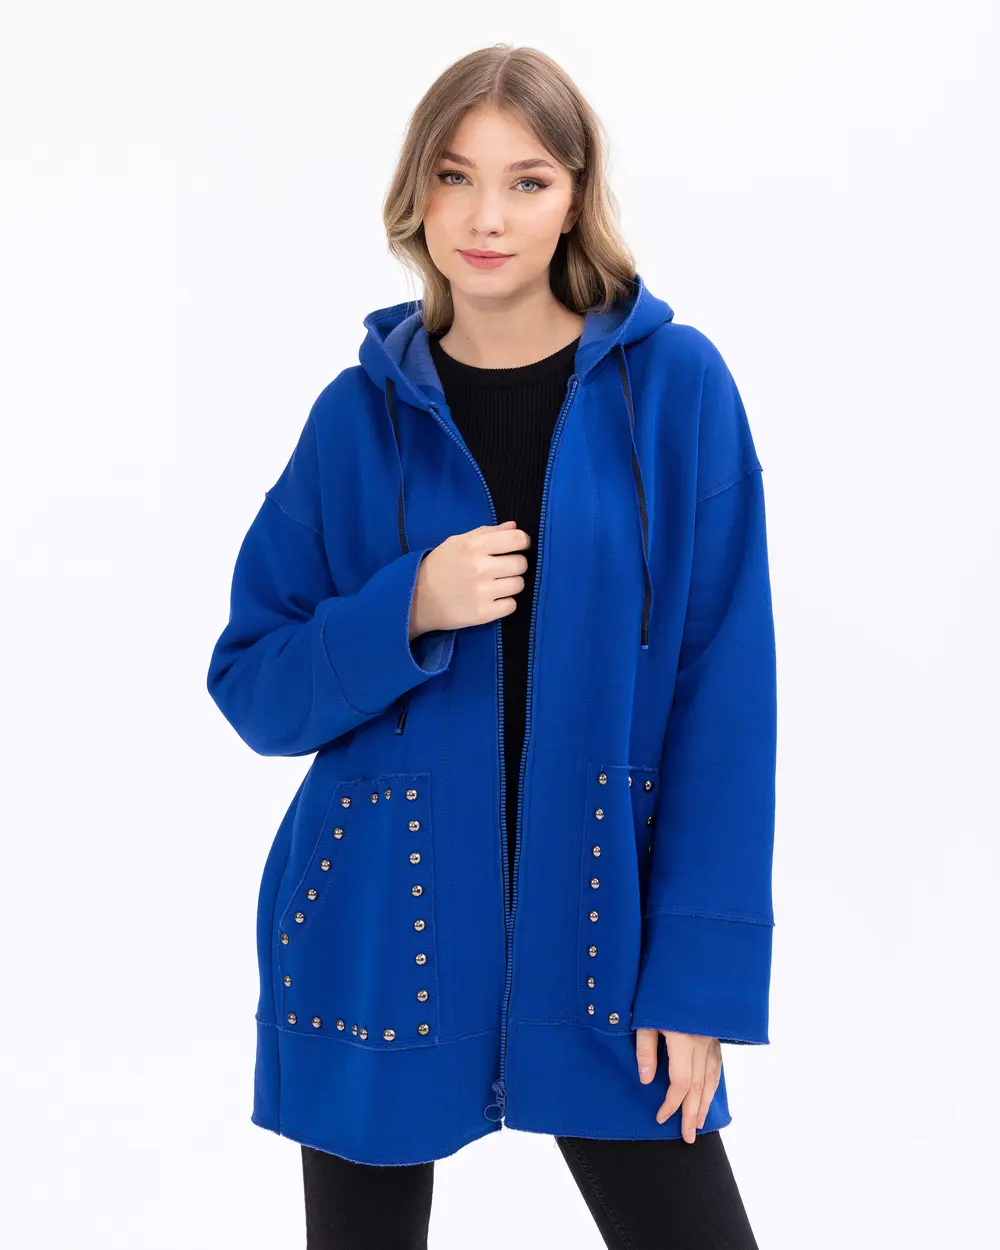 Bead Embroidered Pocket Detailed Hooded Jacket